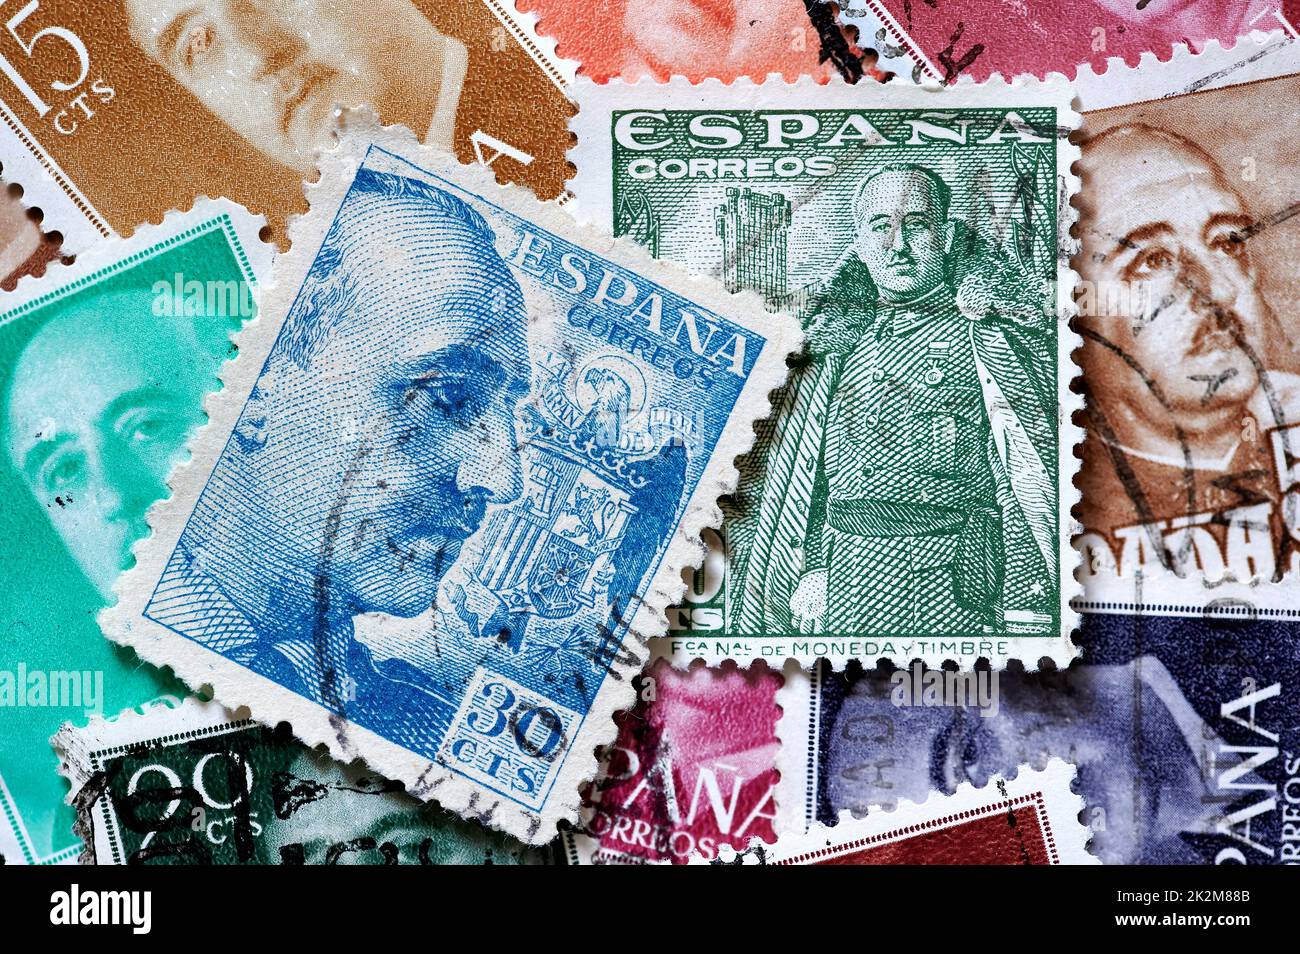 Madrid, Spain; 09-22-2022: Postage stamps with the portrait of the dictator of Spain Francisco Franco who started the civil war and ruled Spain later Stock Photo